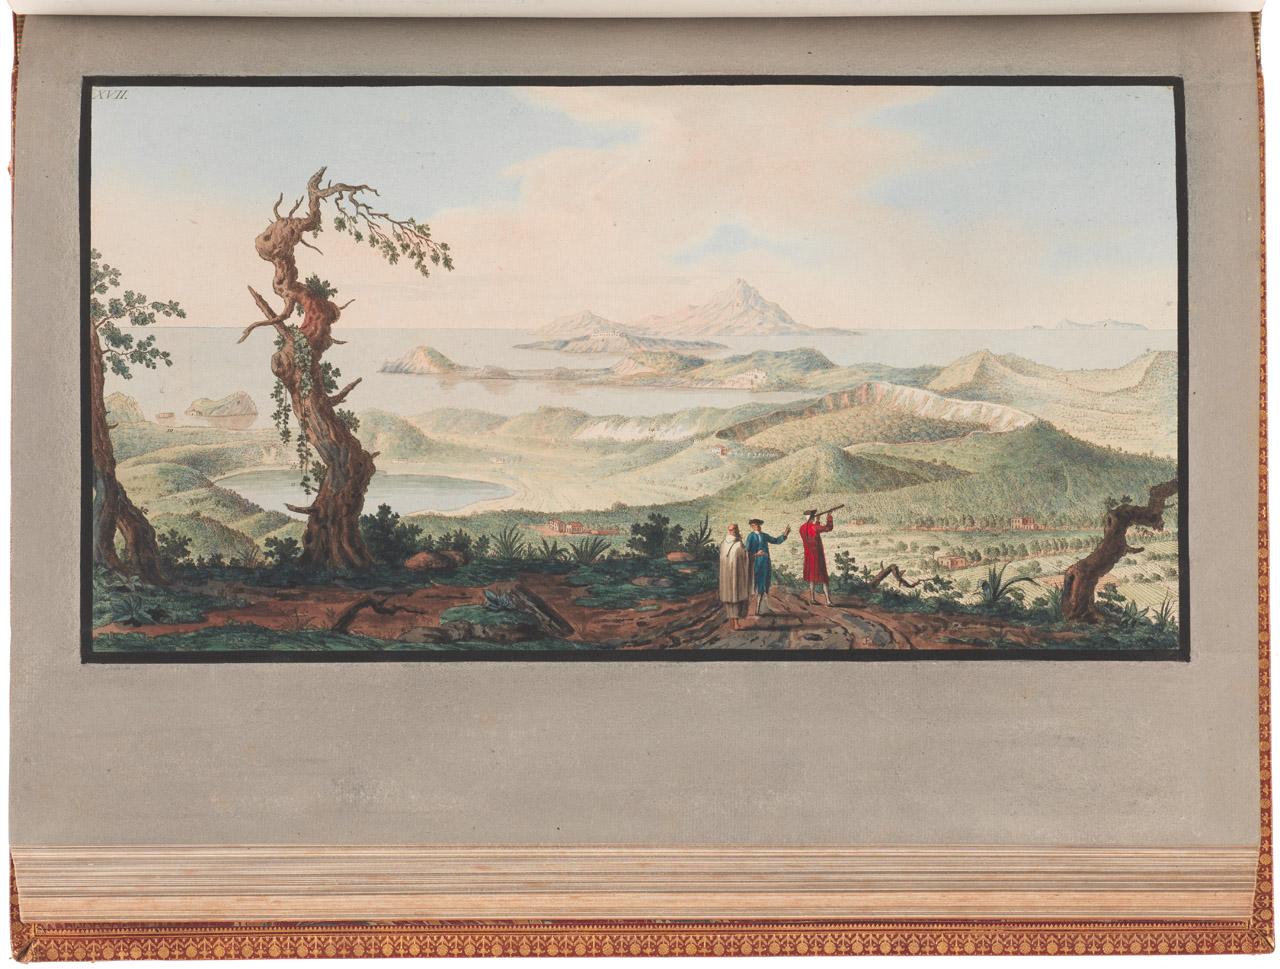 Plate XVII from Campi Phlegraei showing a bird’s eye view from the Convent of the Camaldoli. Three men survey the scene below, with one looking through a telescope..